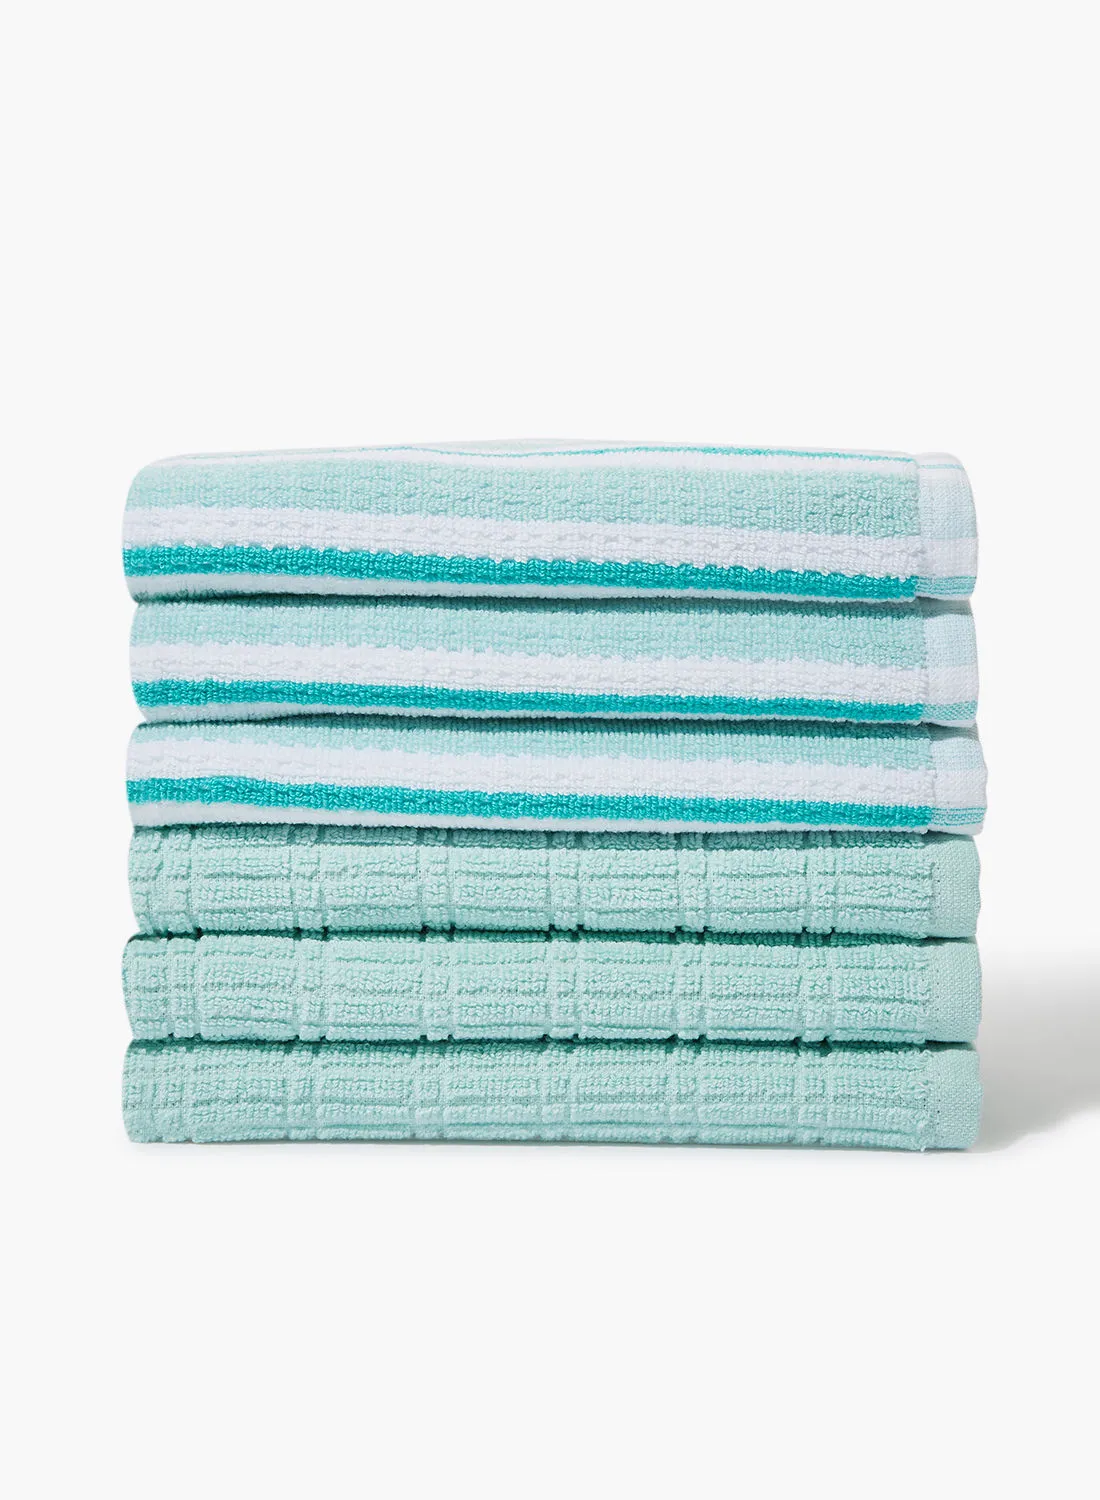 Amal 6 Pack Home Essential Everyday Kitchen towels - 393 GSM 100% Cotton Solid And Yarn Dyed (38x63 cm) - Aqua Color